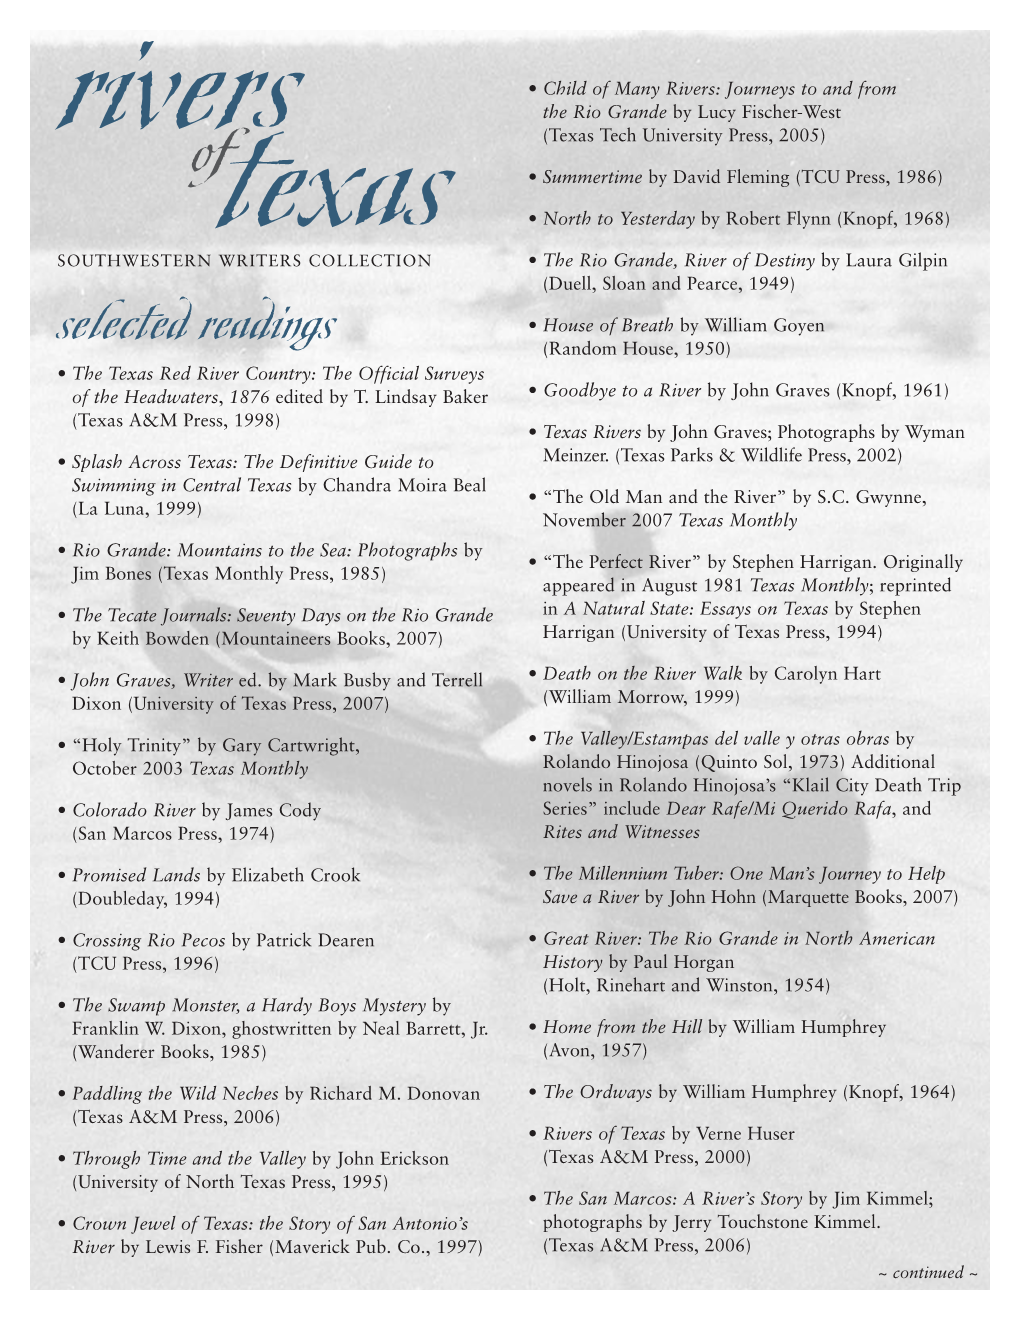 Selected Readings (Random House, 1950) • the Texas Red River Country: the Official Surveys of the Headwaters, 1876 Edited by T